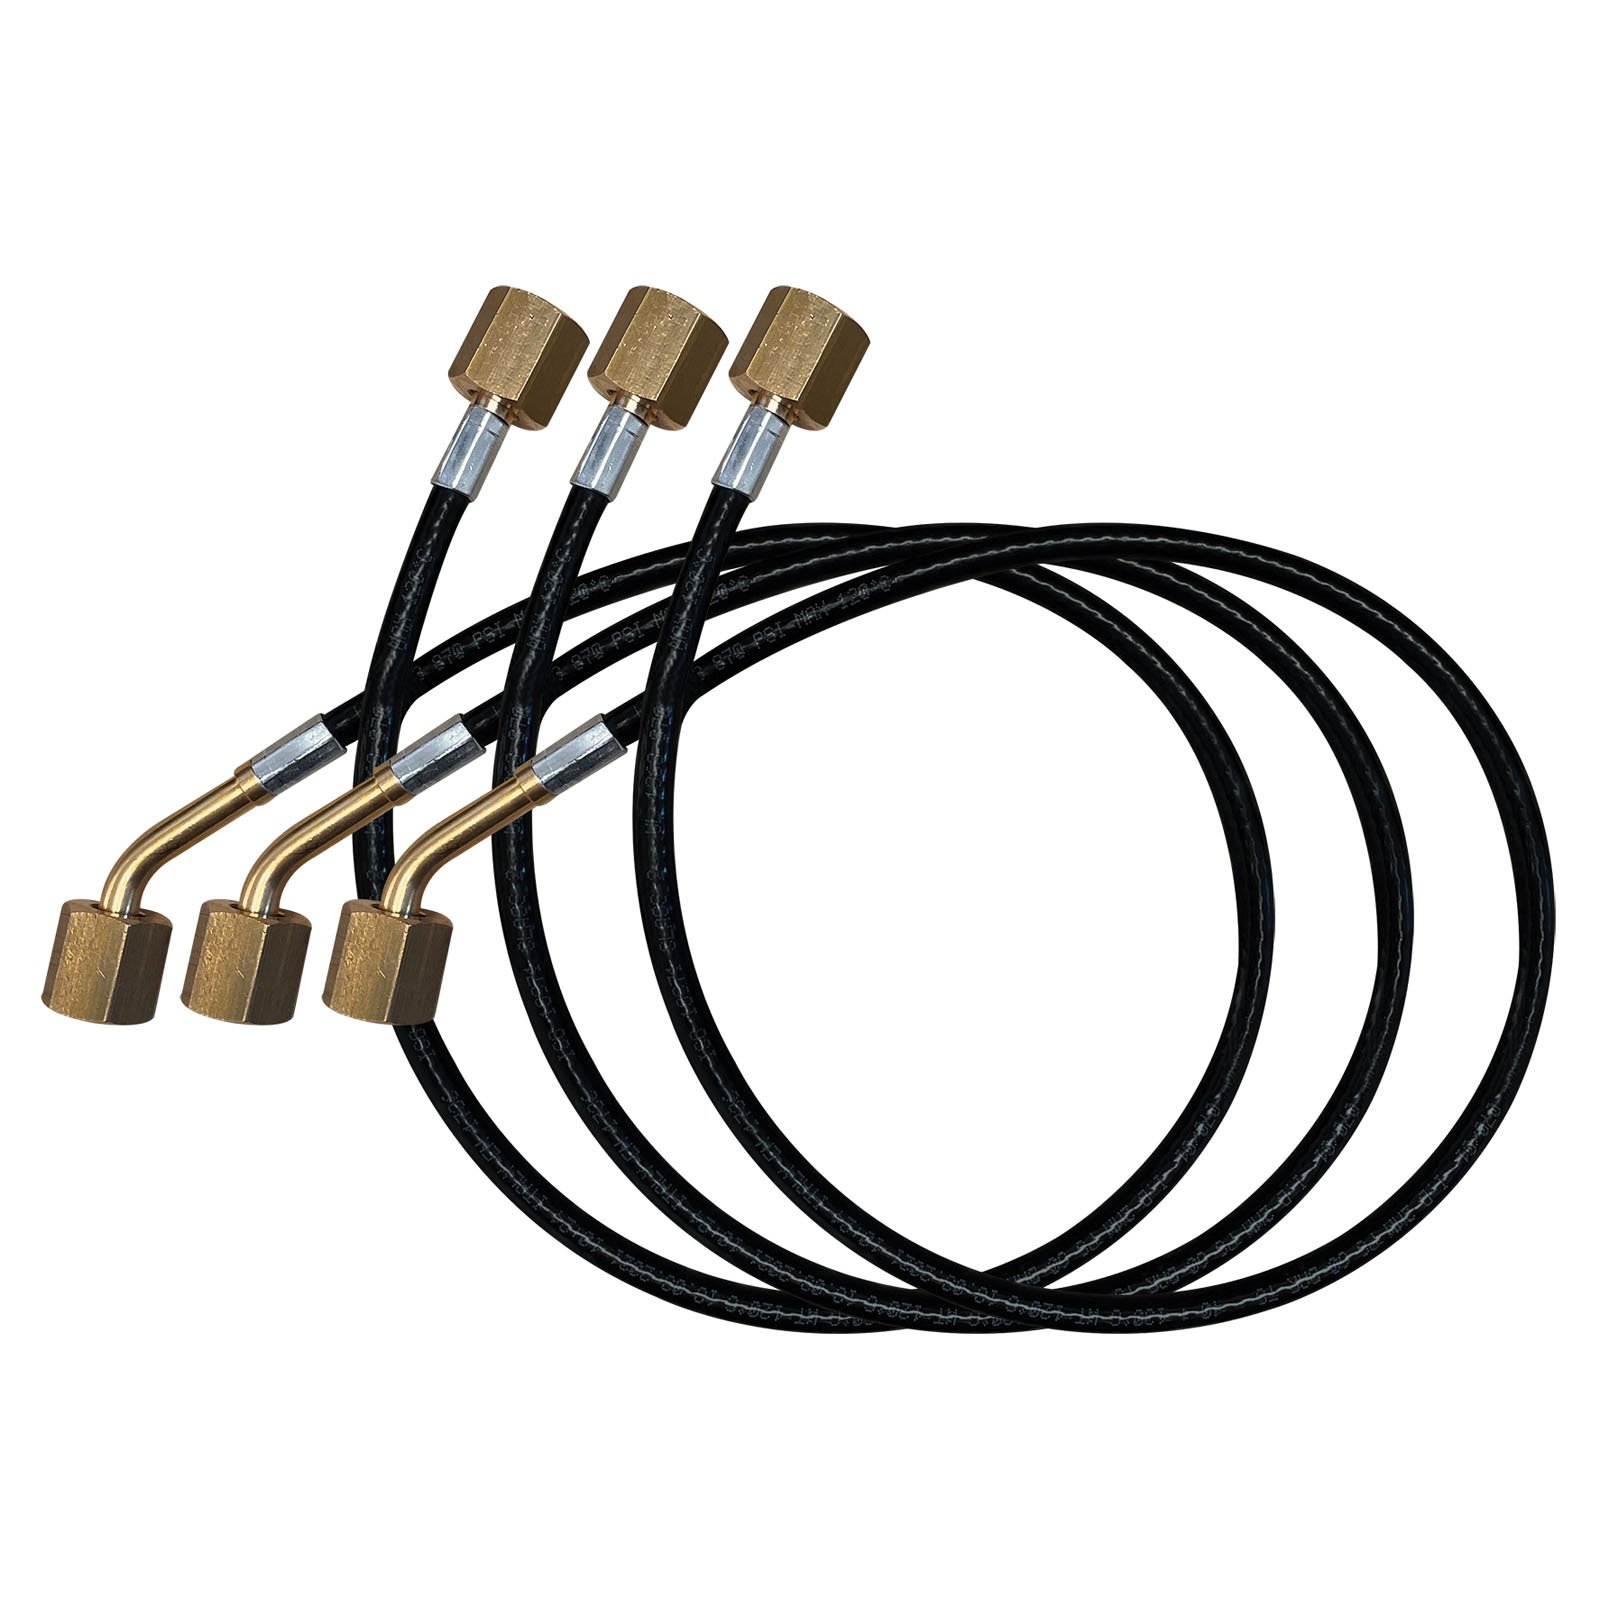 Capillary tubing with straight x 45° fittings with pushers - Set of 3 x 45 cm (18").
